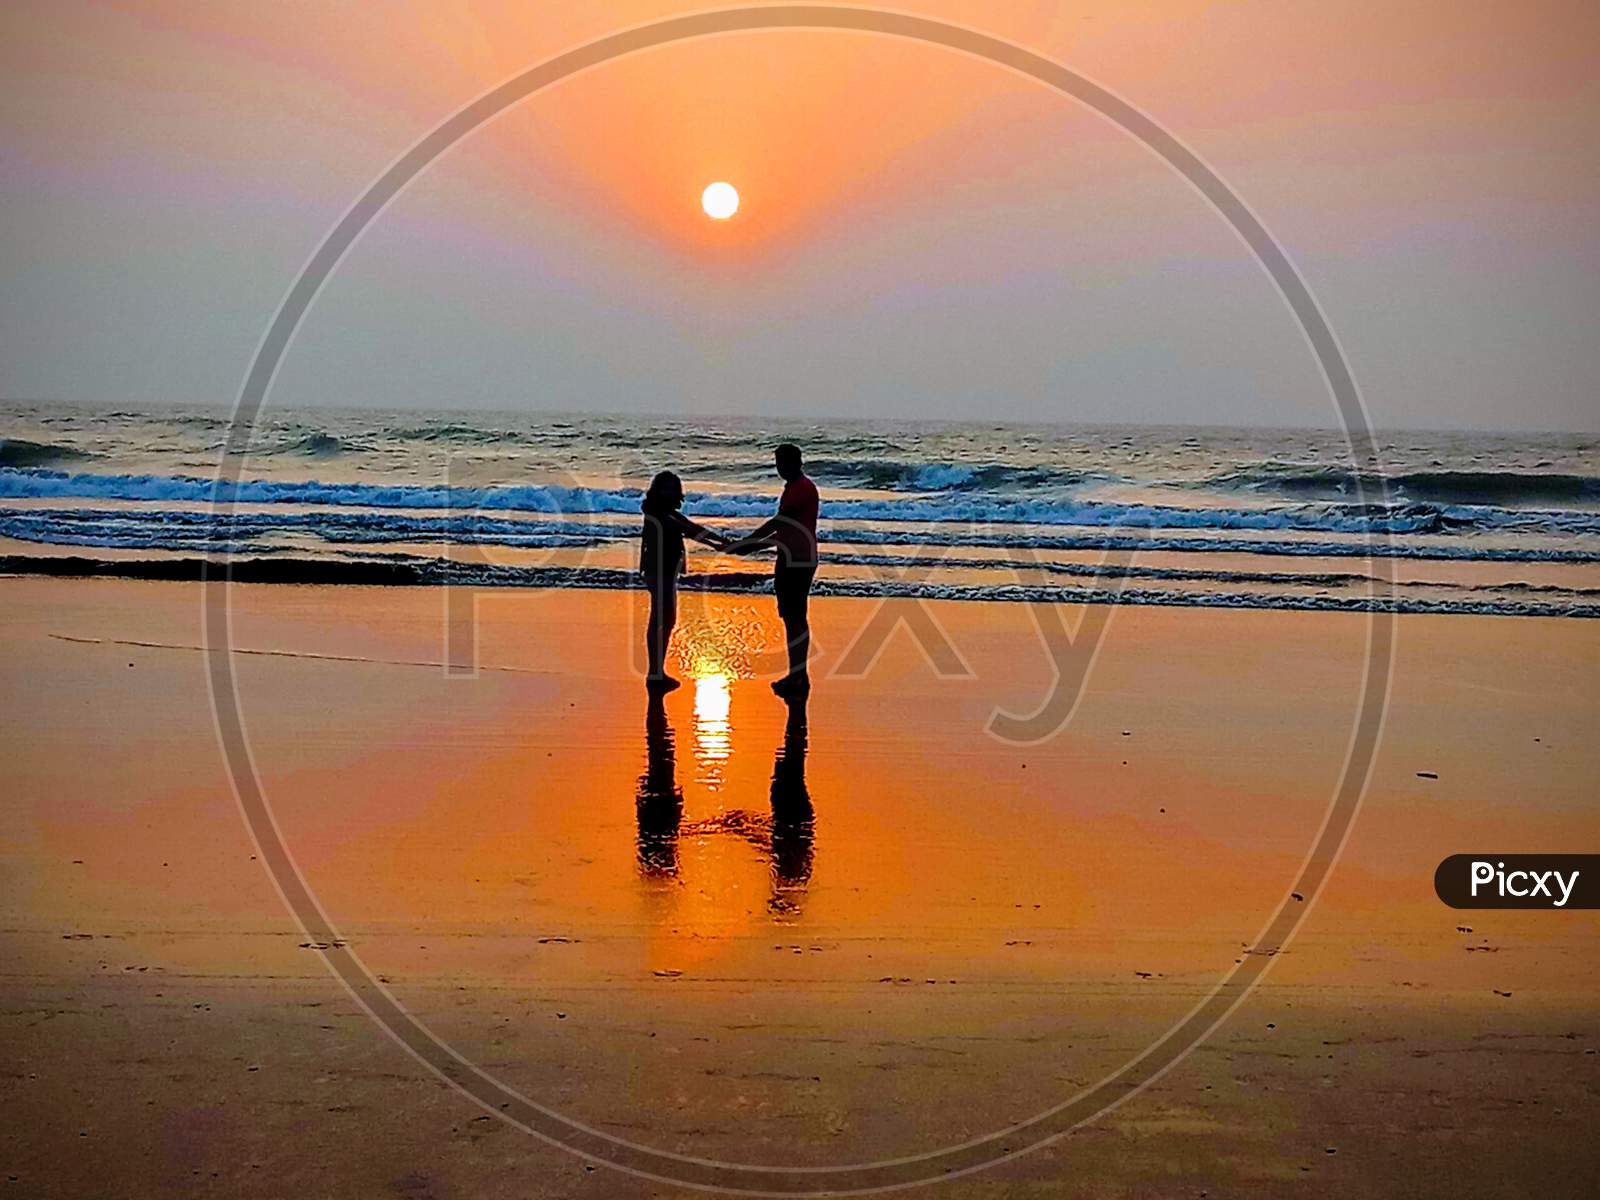 Sunrise at beach with couple holding hands and reflection on water with colorful scenery